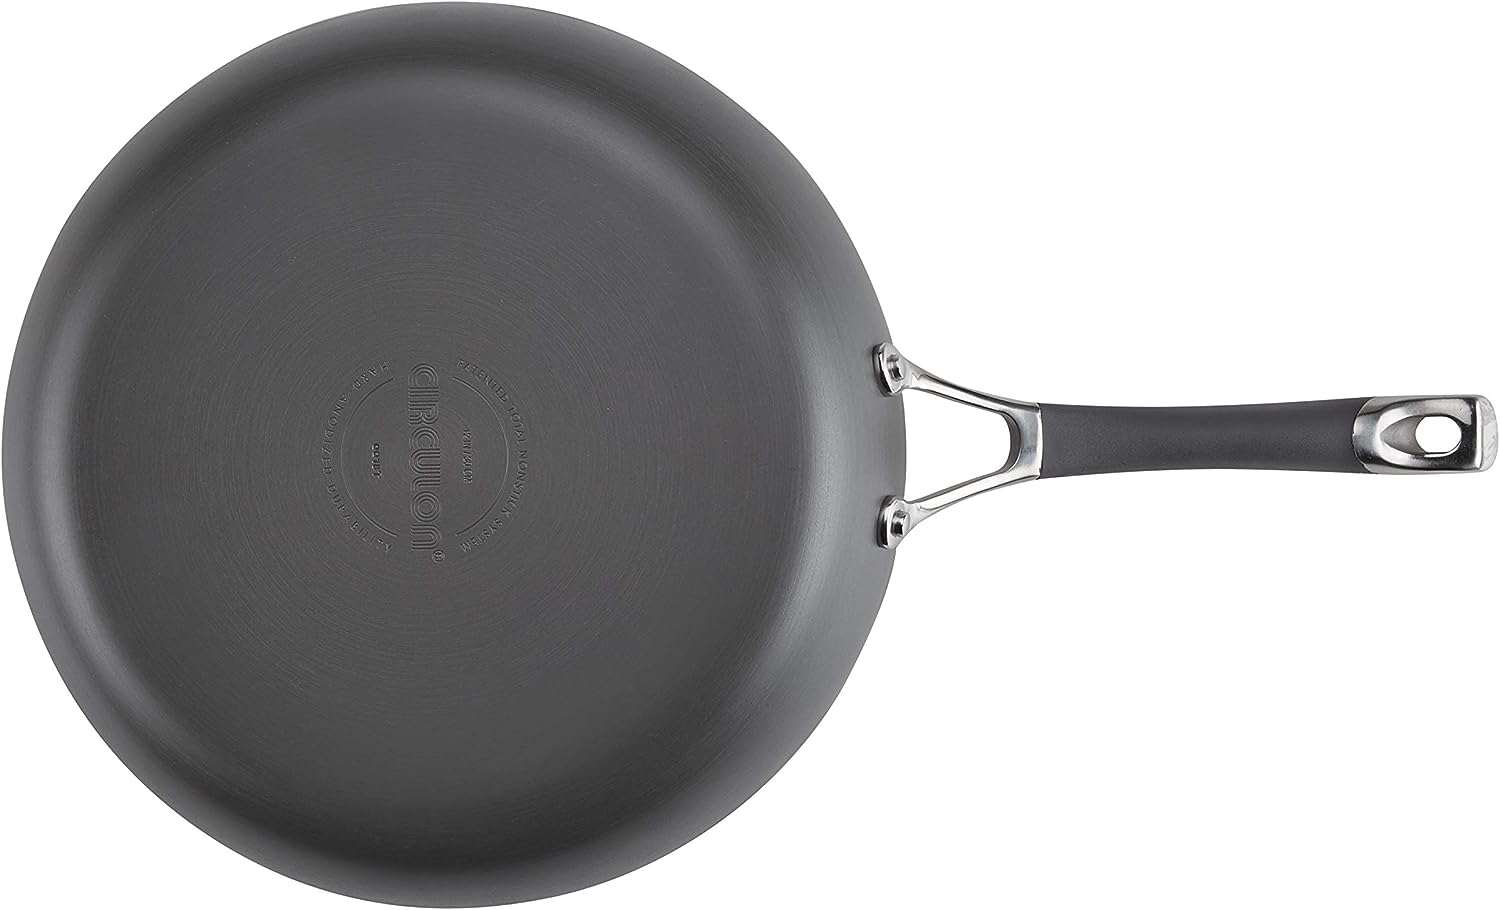 https://bigbigmart.com/wp-content/uploads/2023/08/Circulon-Radiance-Deep-Hard-Anodized-Nonstick-Frying-Pan-Skillet-with-Lid-12-Inch-Gray0.jpg